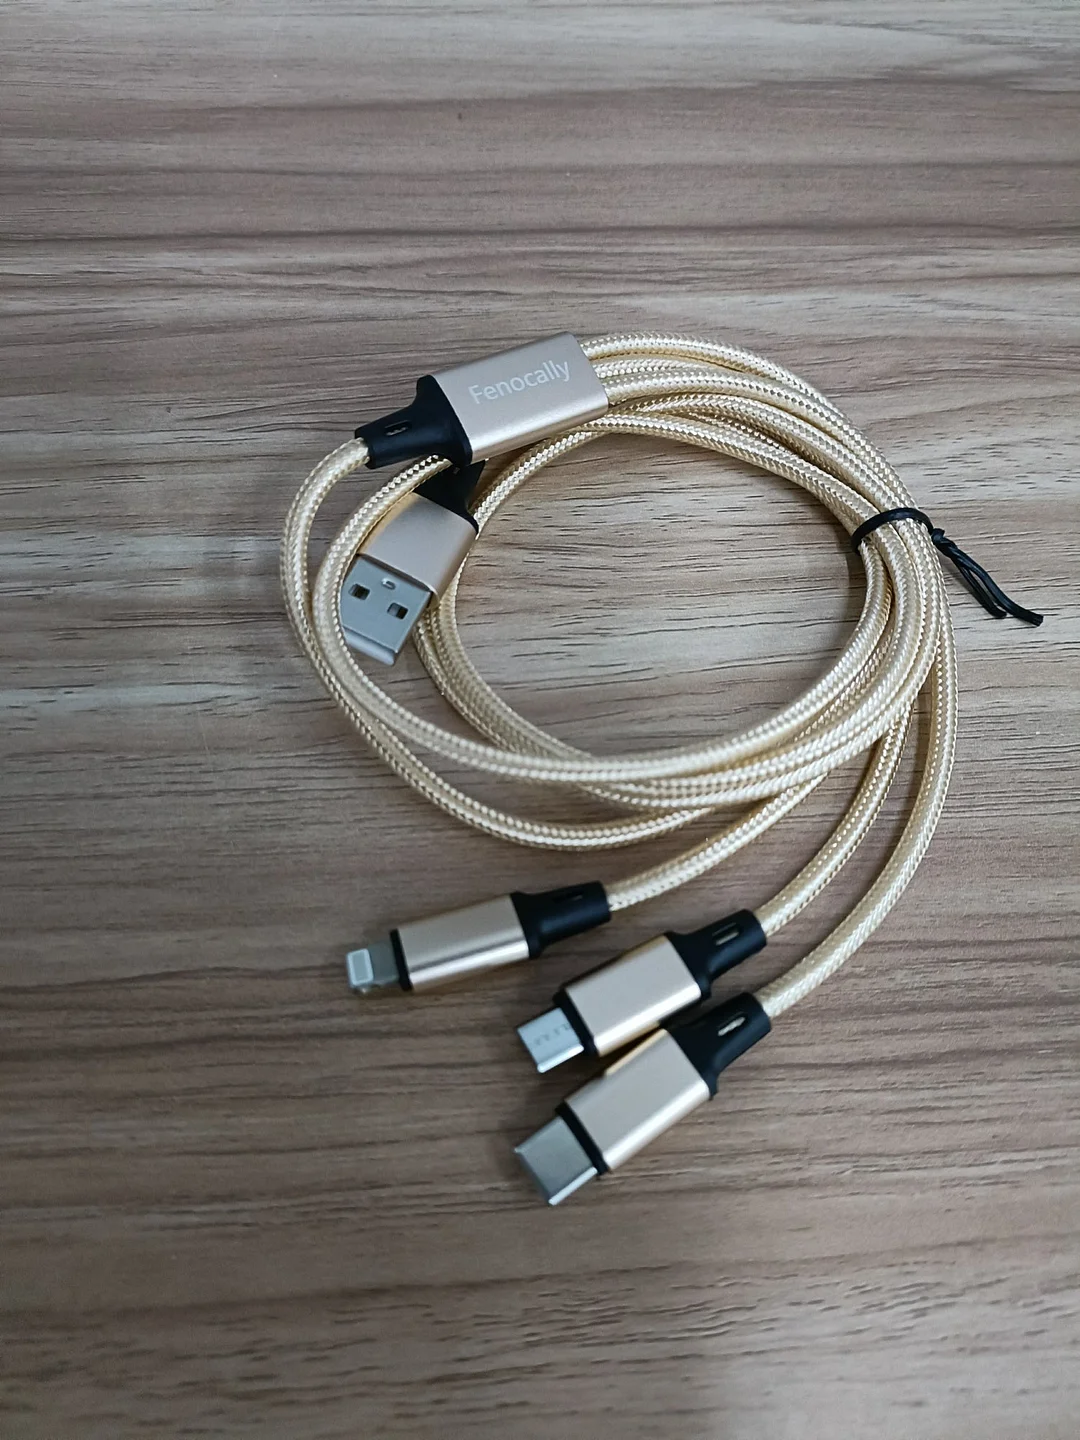 Fenocally Data Cables 3-IN-1 USB Charging Cable Multi-Wire Type-C Micro USB Connector